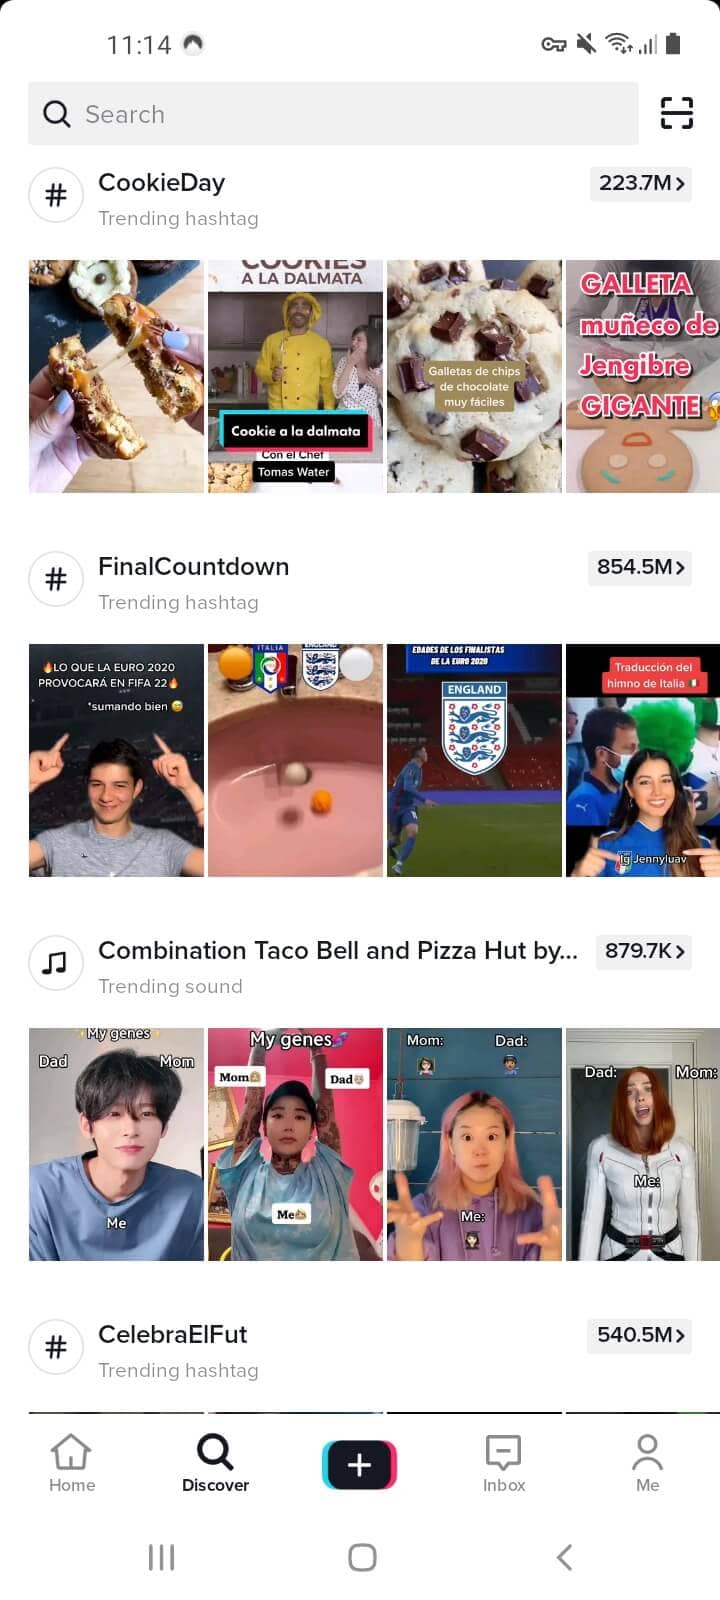 The TikTok discover page is full of TikTok content ideas that resonate with audiences.